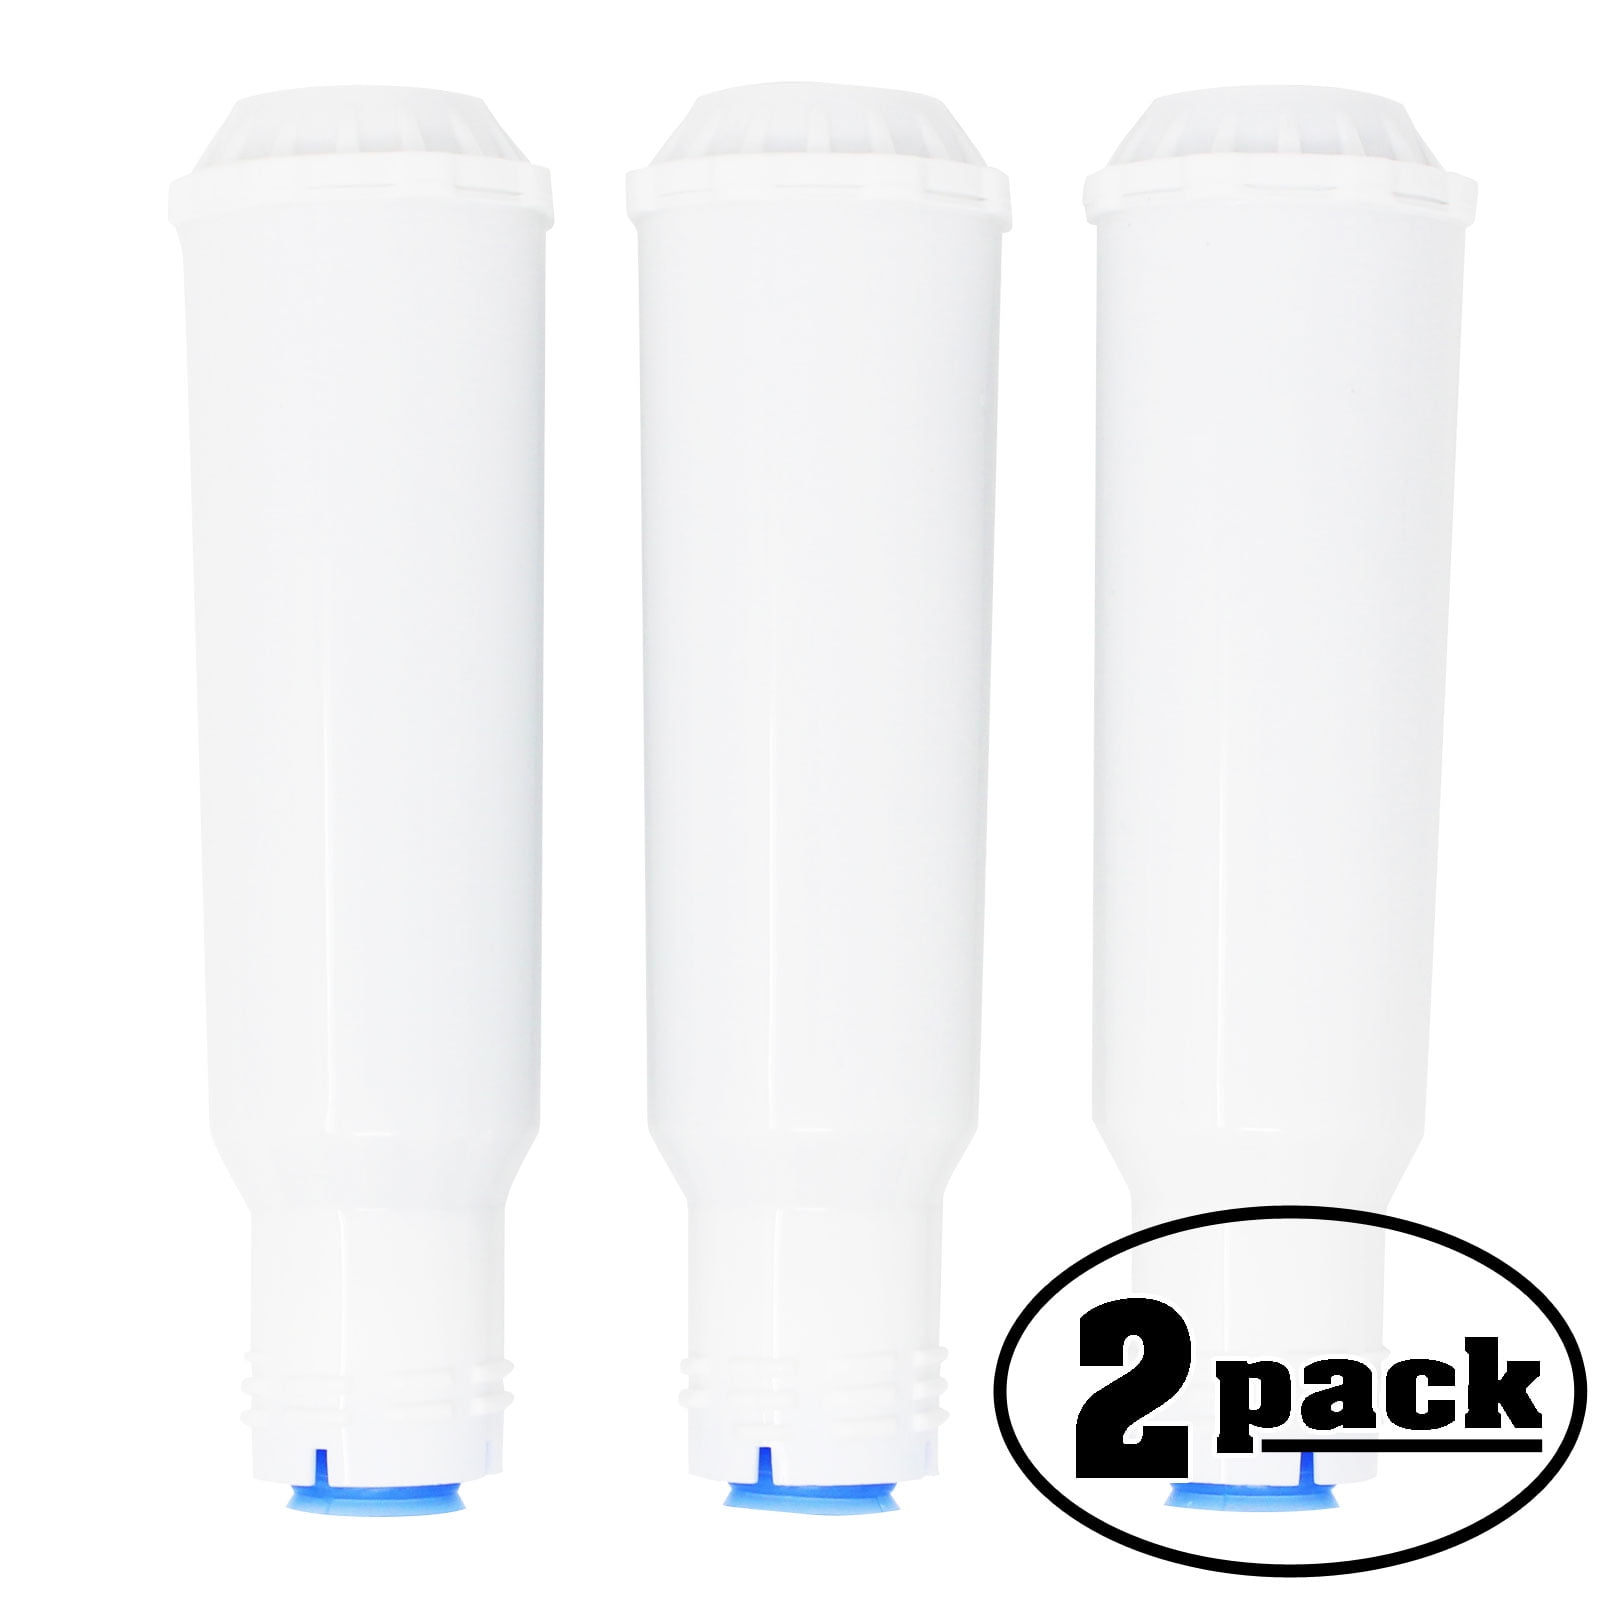 4 Pack ET3510 Coffee Machines Replacement Water Filter For Krups ET351 